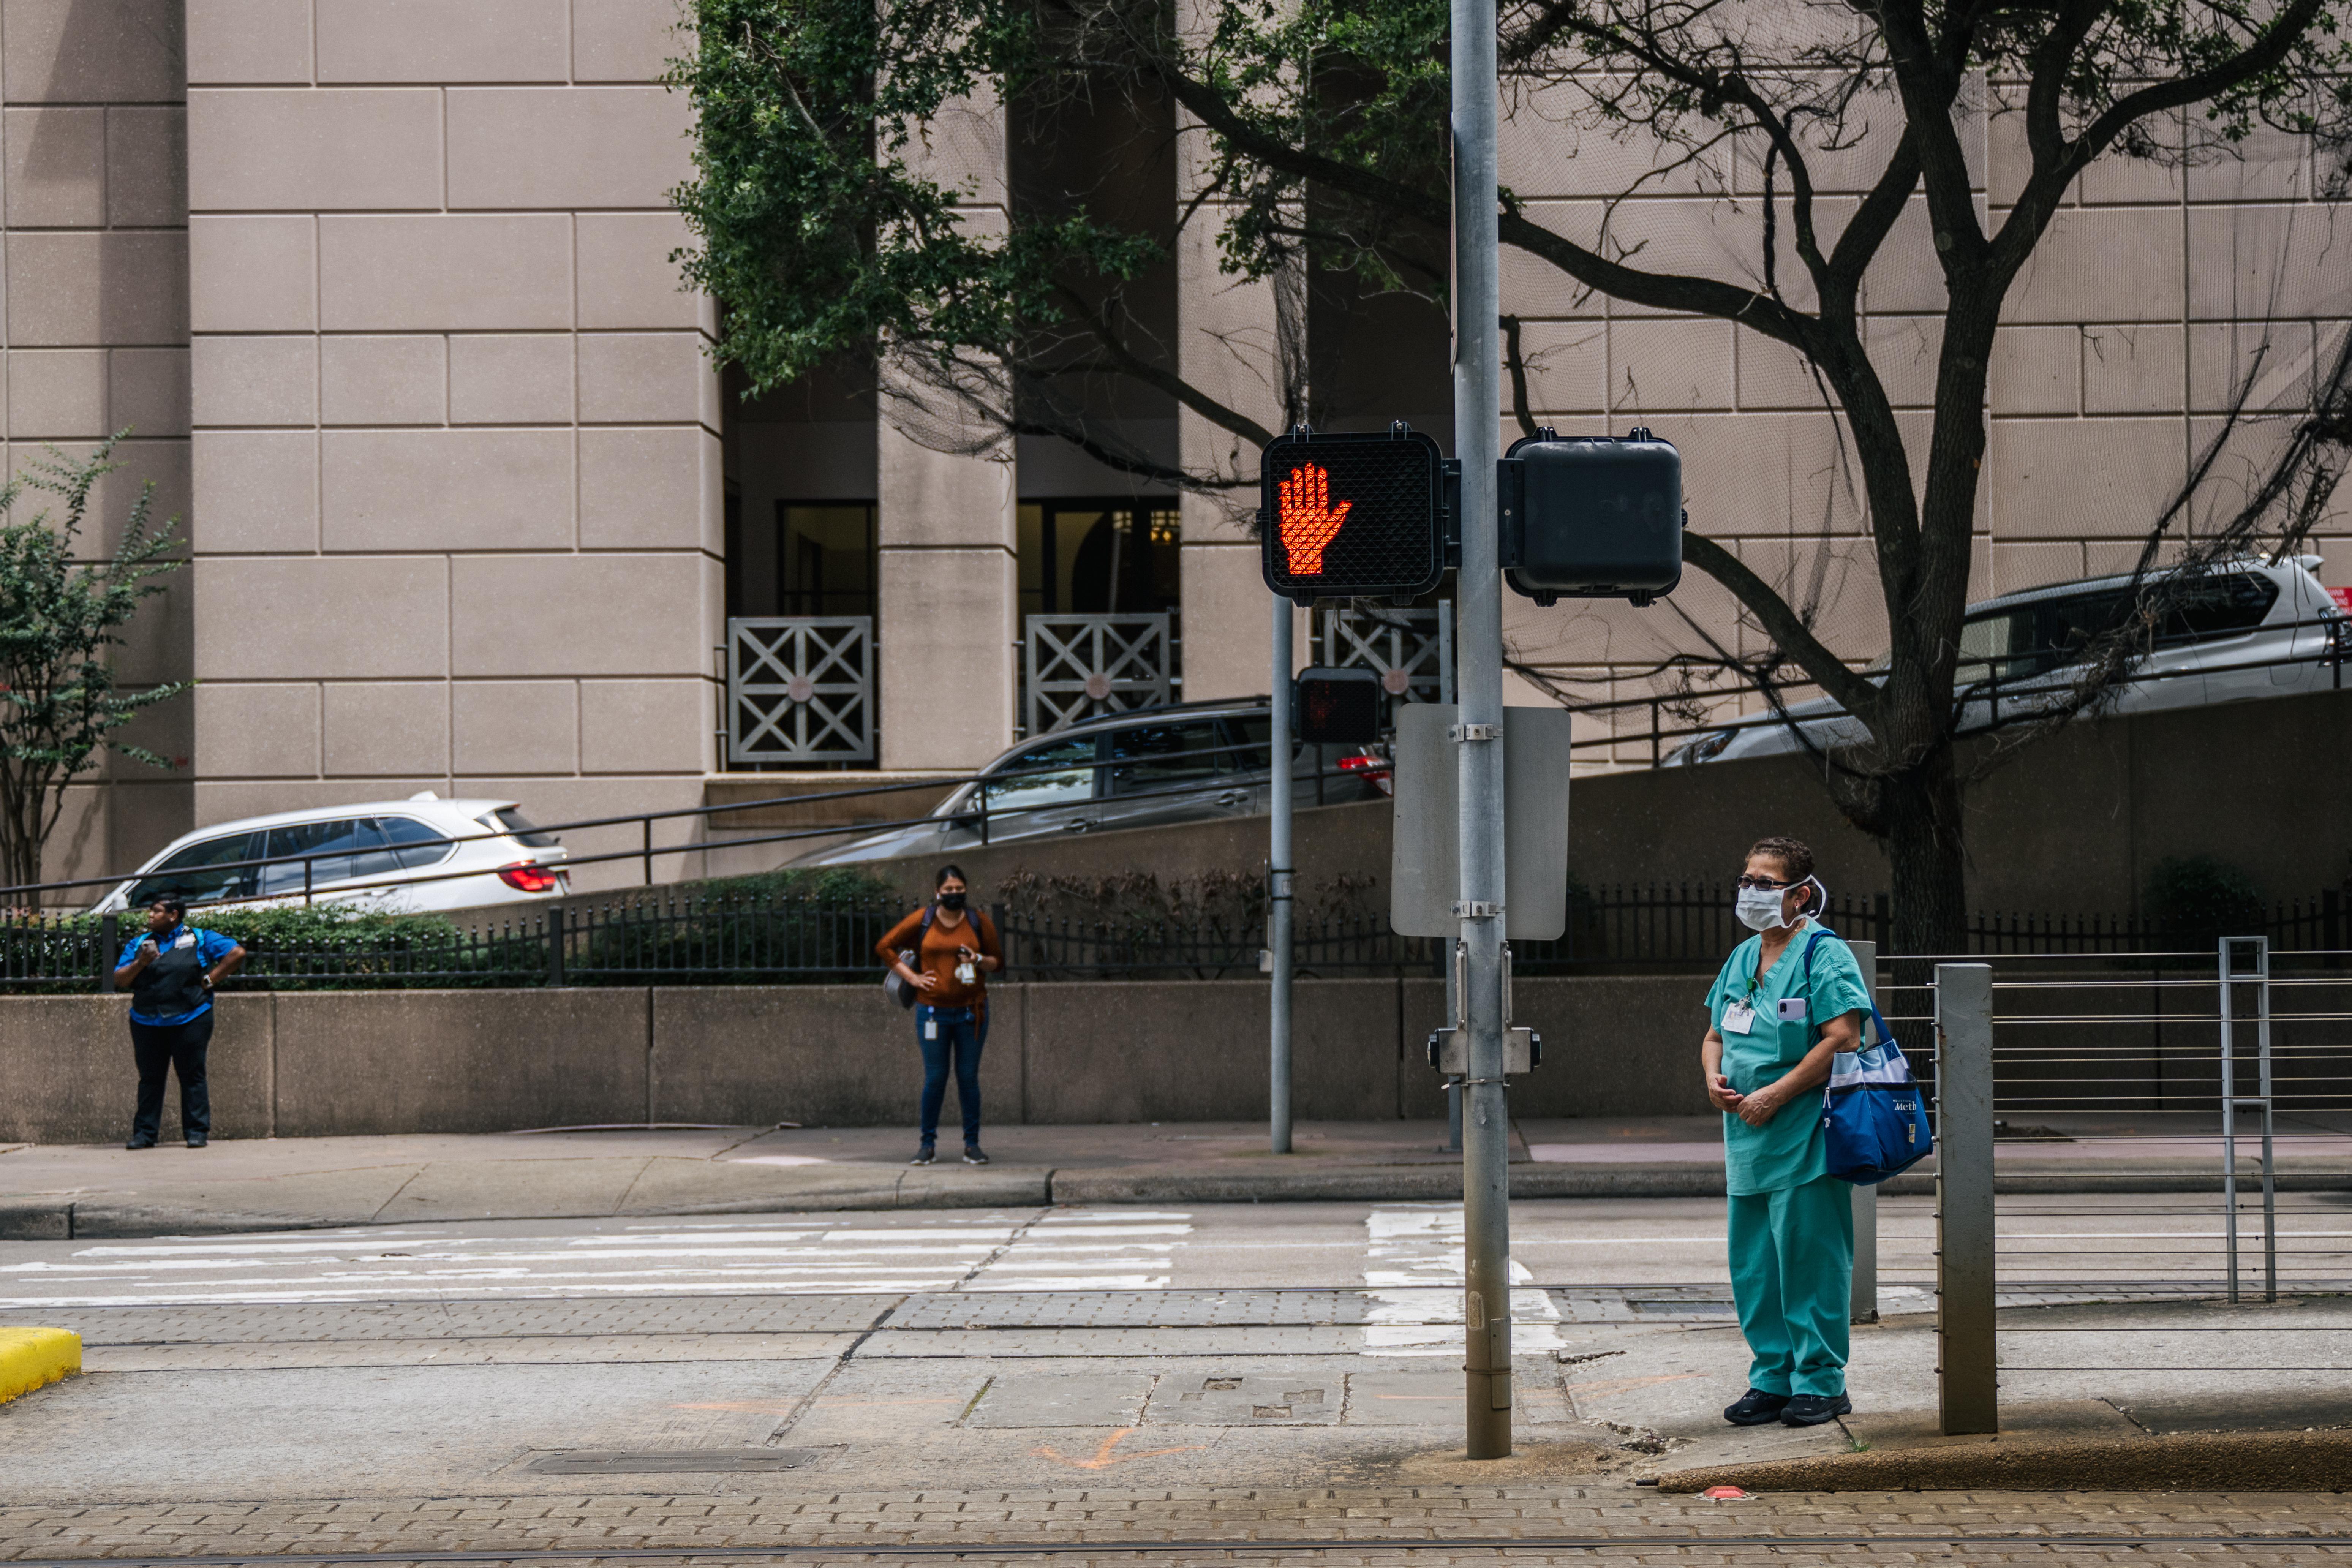 A nurse and pedestrians wait to cross an intersection outside of the Houston Methodist Hospital on June 09, 2021 in Houston, Texas. Houston Methodist Hospital has suspended 178 employees without pay for 14 days for their refusal to comply with its COVID-19 vaccine requirement. 